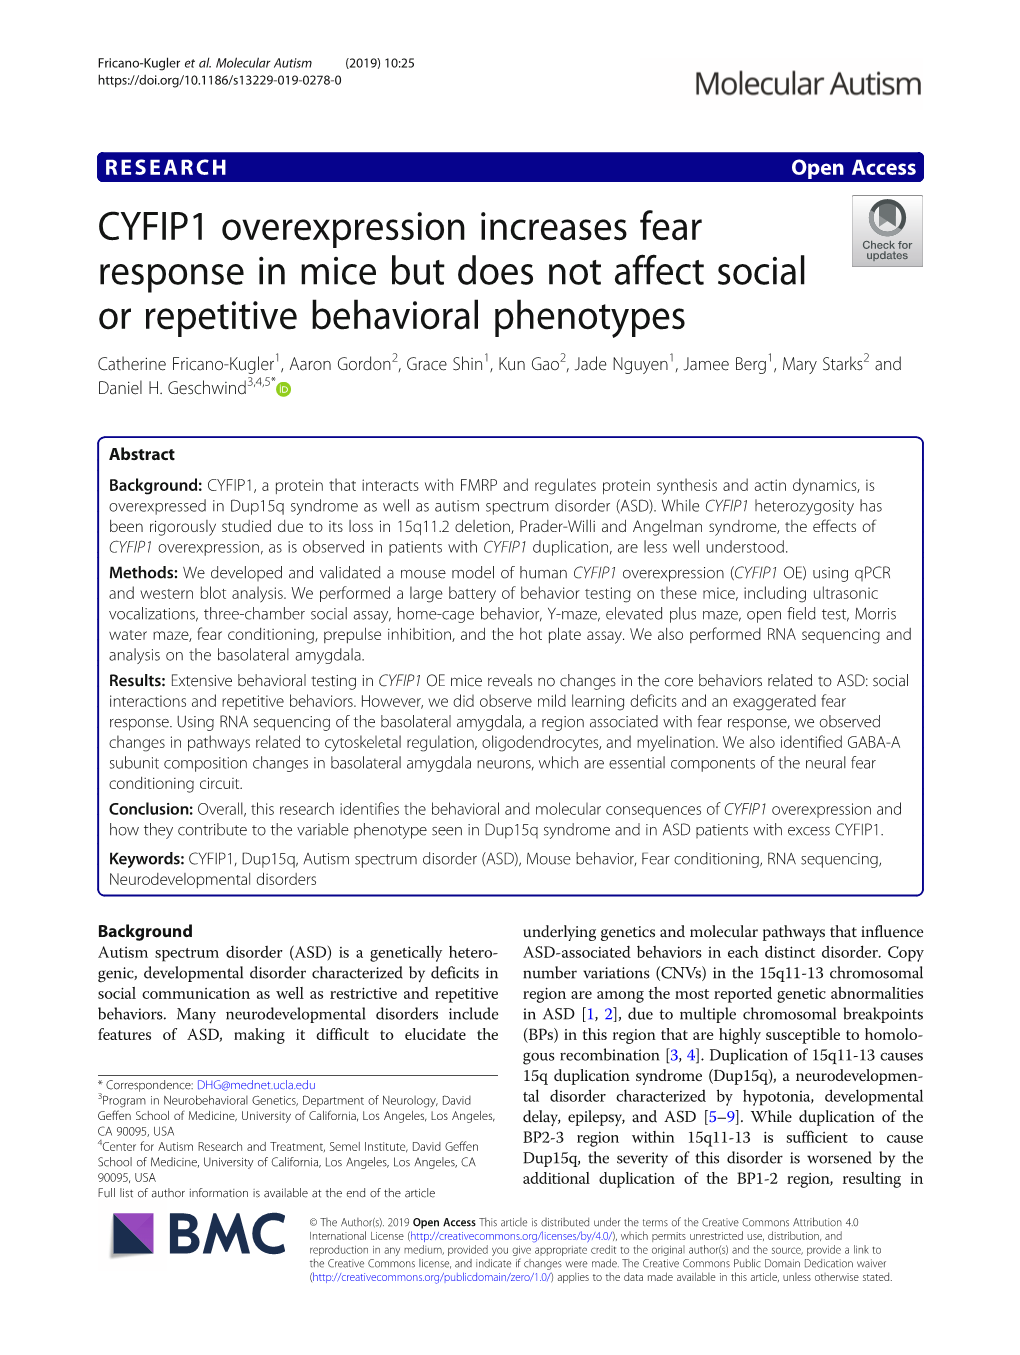 CYFIP1 Overexpression Increases Fear Response In